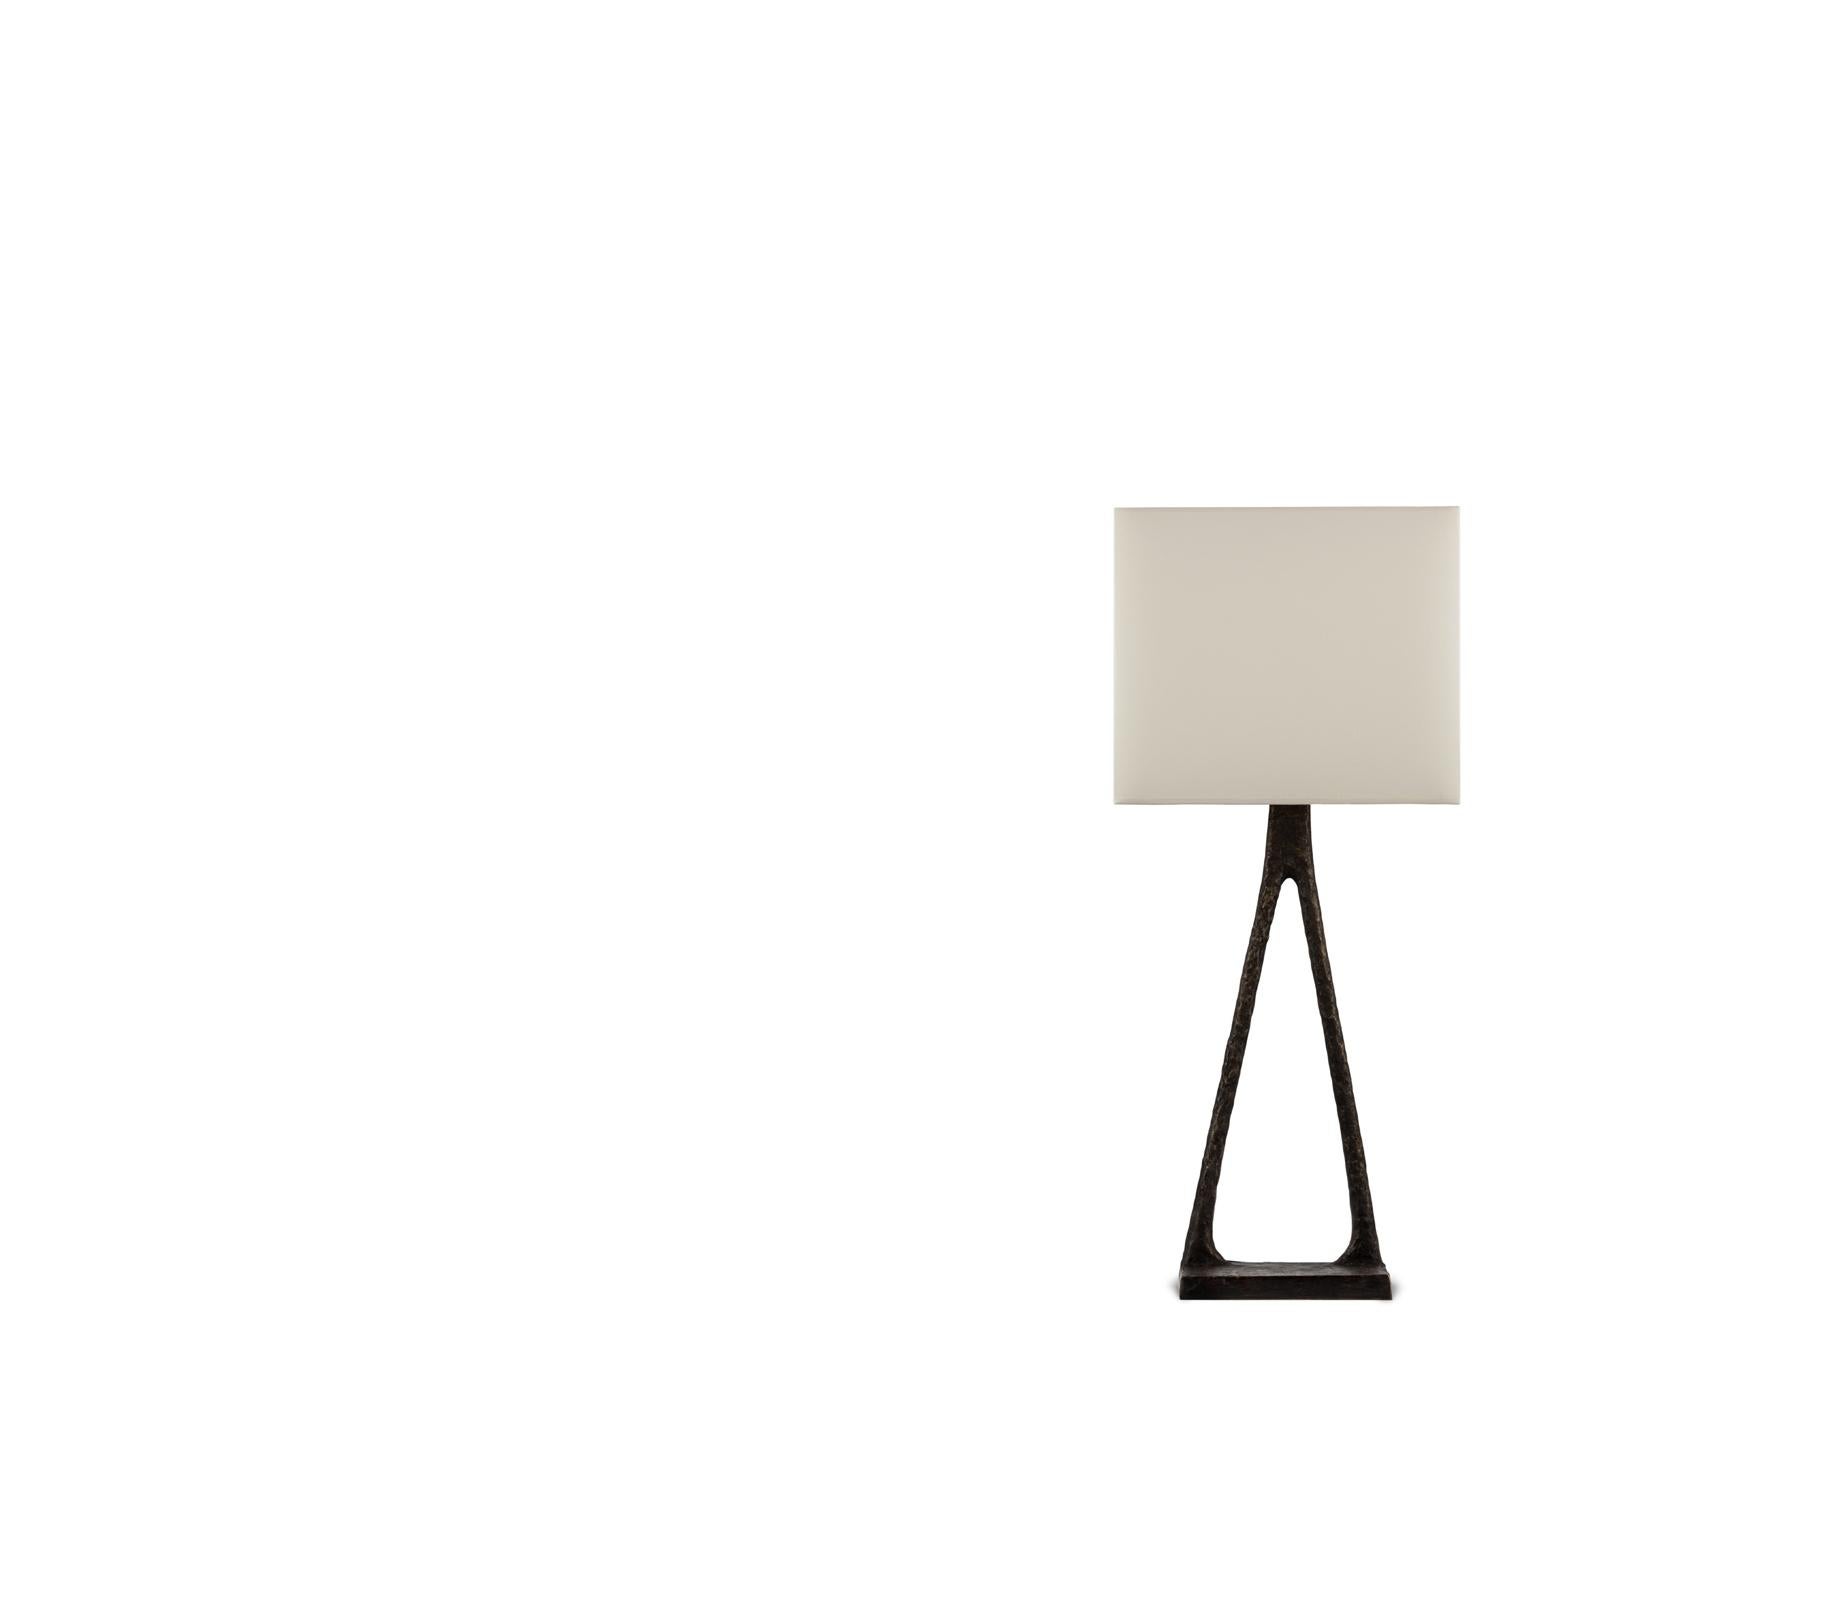 Passage table lamp by LK Edition
Dimensions: L 180 x 75 x 10 cm
Materials: Bronze

It is with the sense of detail and requirement, this research of the exception by the selection of noble materials and his culture of the french know-how , that